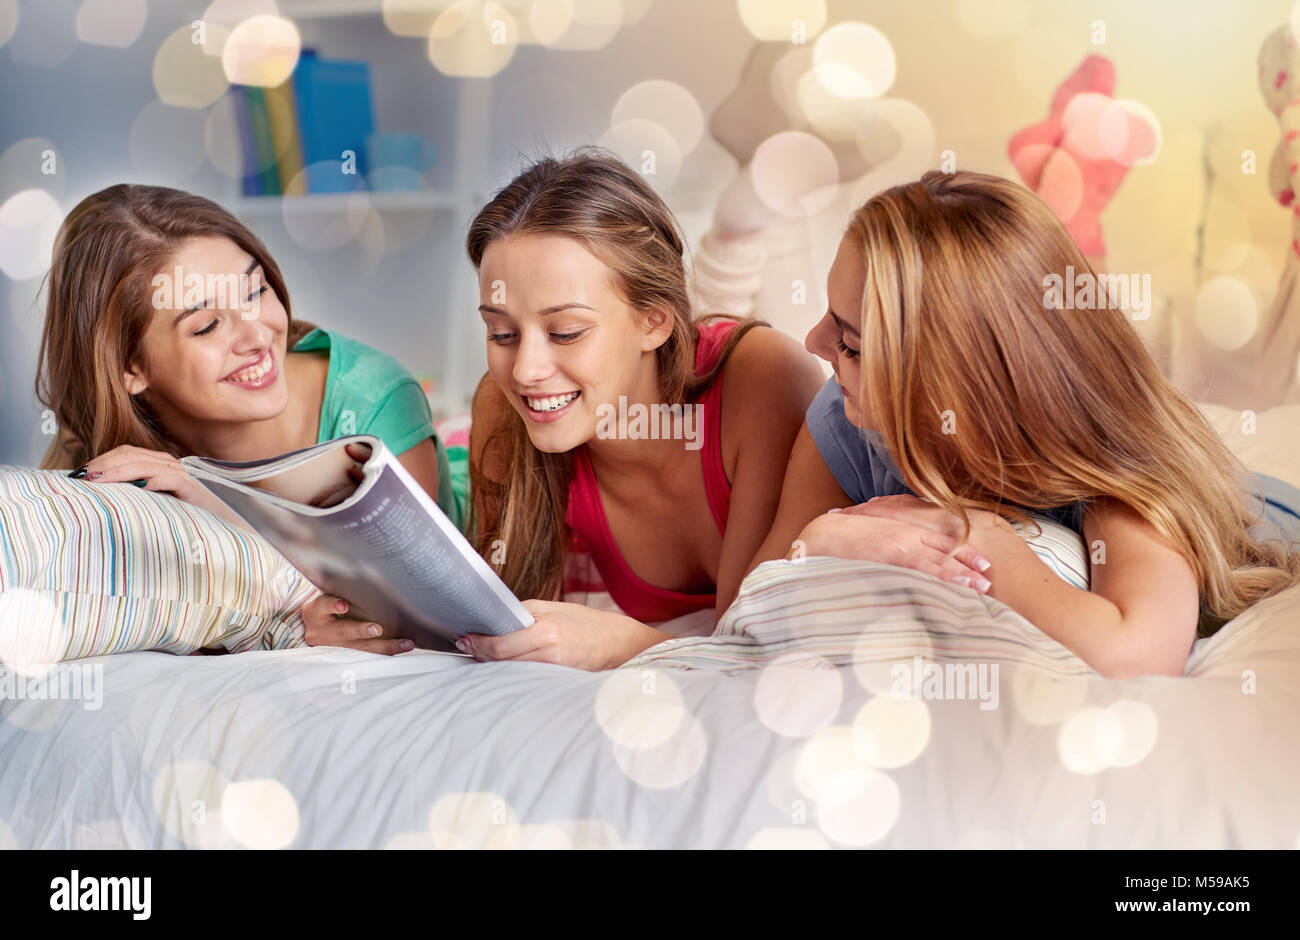 friends or teen girls reading magazine at home Stock Photo